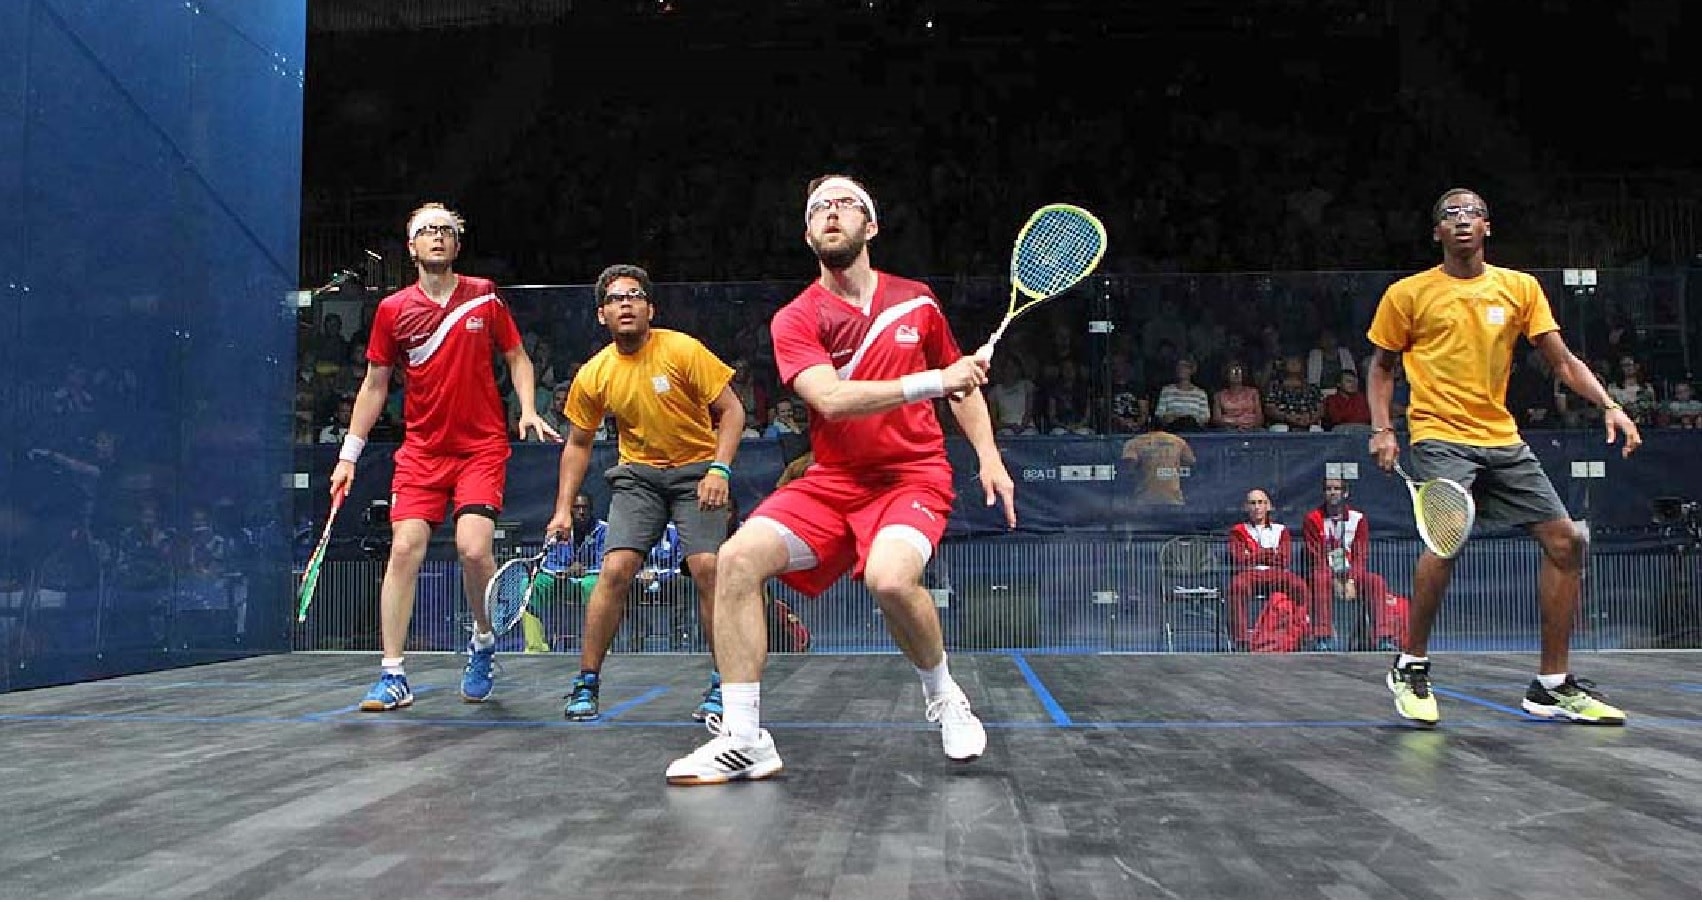 James Willstrop and Daryl Selby representing England in doubles 